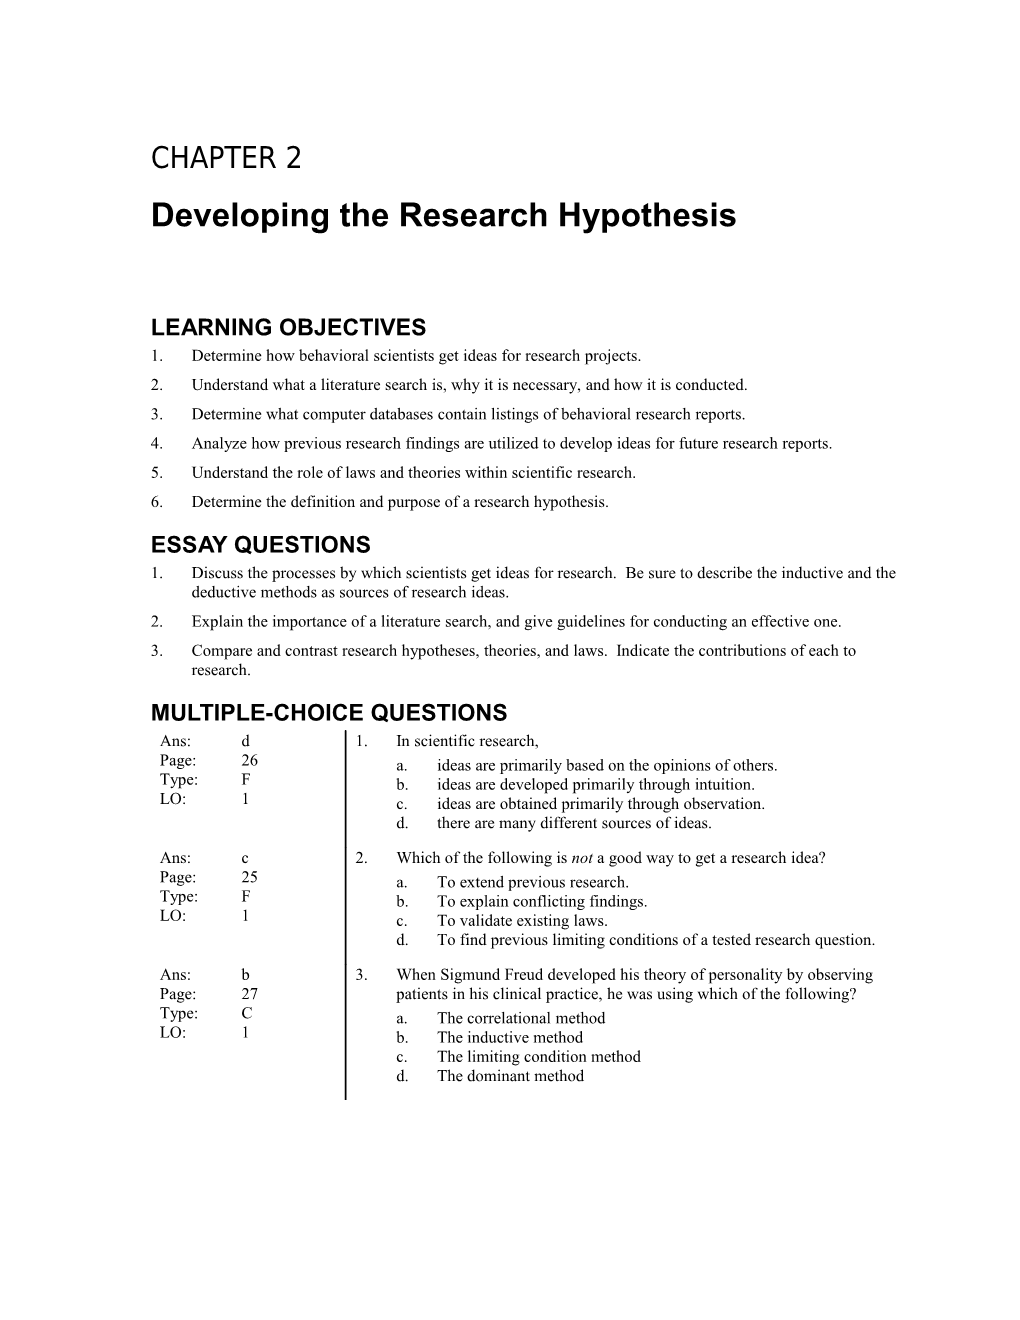 Chapter 2: Developing the Research Hypothesis 1